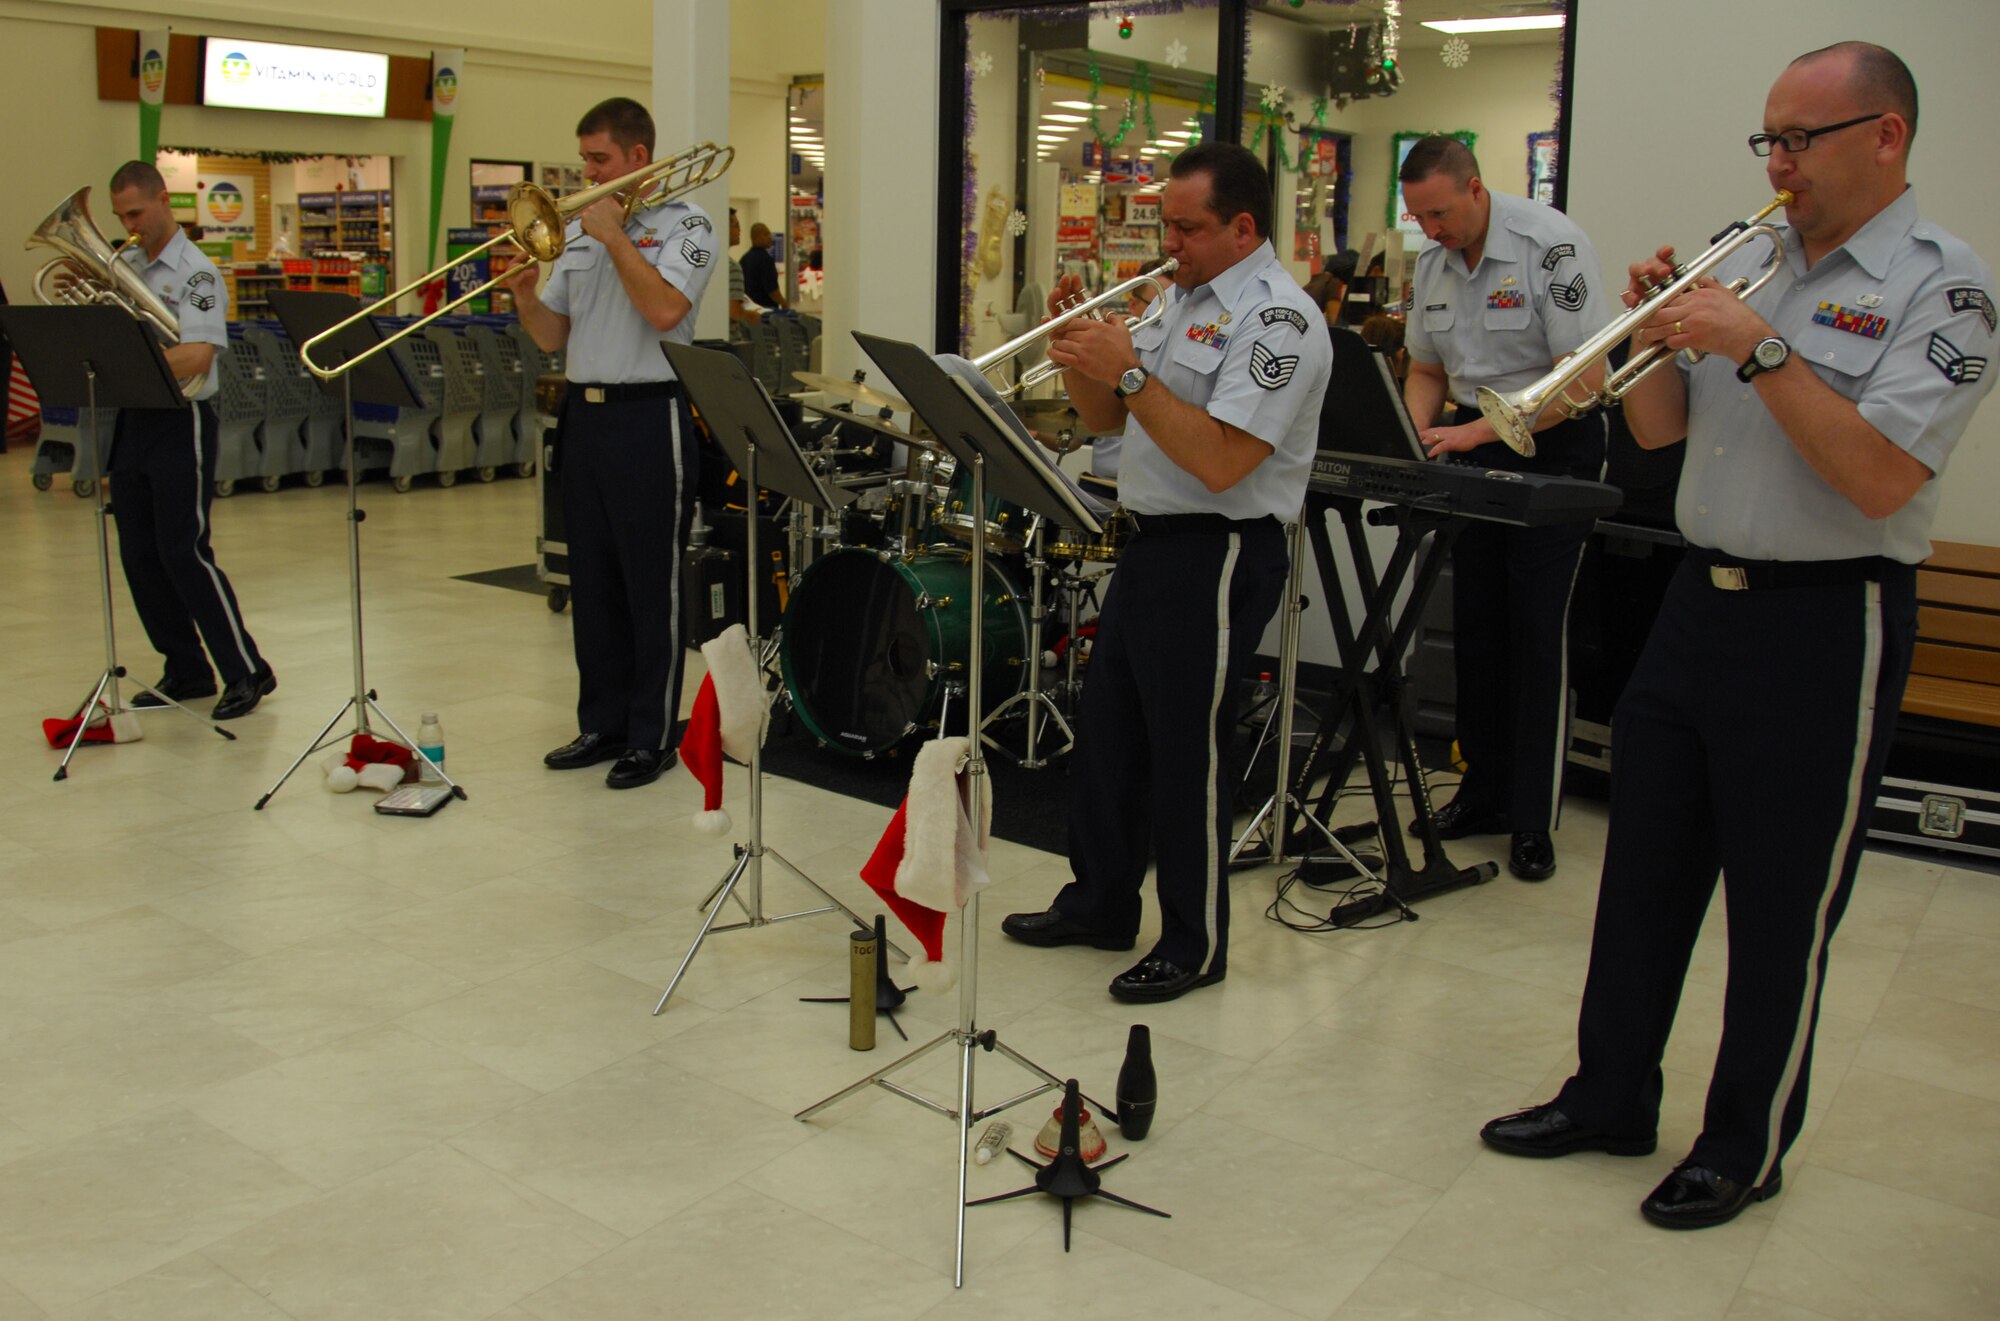 ANDERSEN AIR FORCE BASE, Guam - Members of the Band of the Pacific's Alaska Brass perform a one-hour set of holiday music in the Base Exchange here Dec. 15. The Alaska Brass performs many styles of music, including Baroque and Classical, marches, popular, ragtime, dixie and jazz. (U.S. Air Force photo by Senior Airman Jonathan Hart)